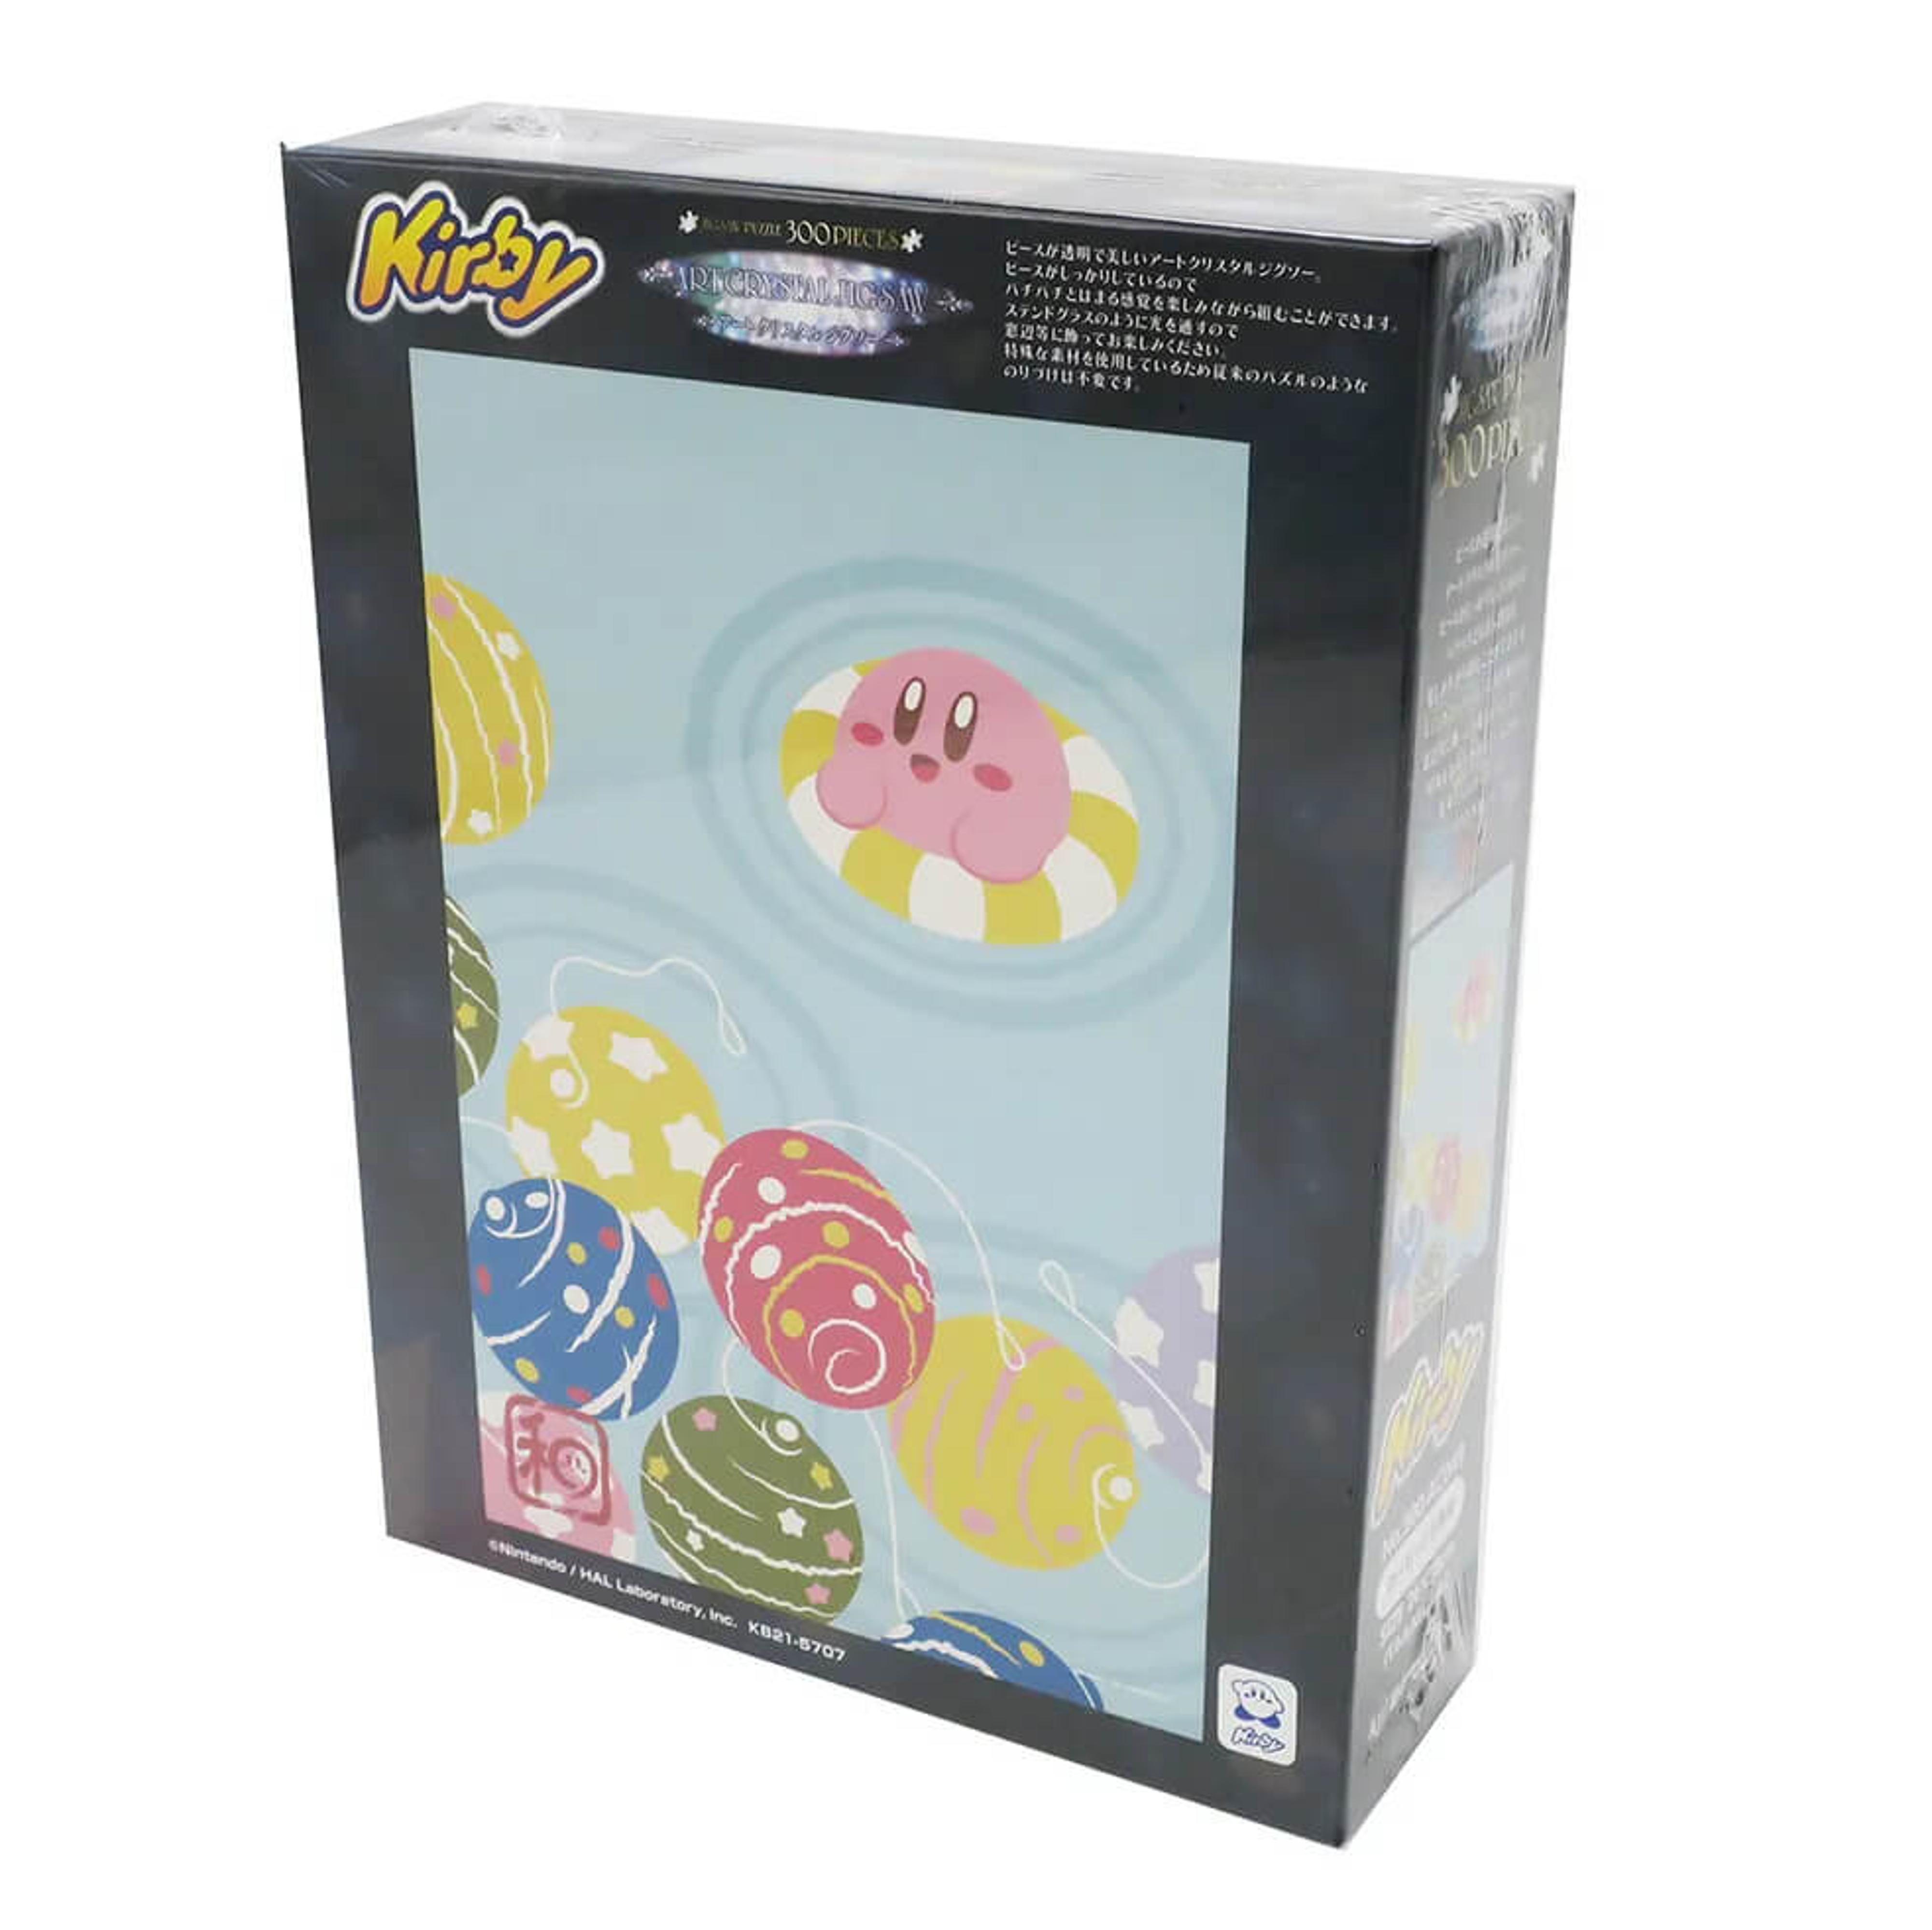 Kirby and Water Balloons Artcrystal Puzzle (300 pc)